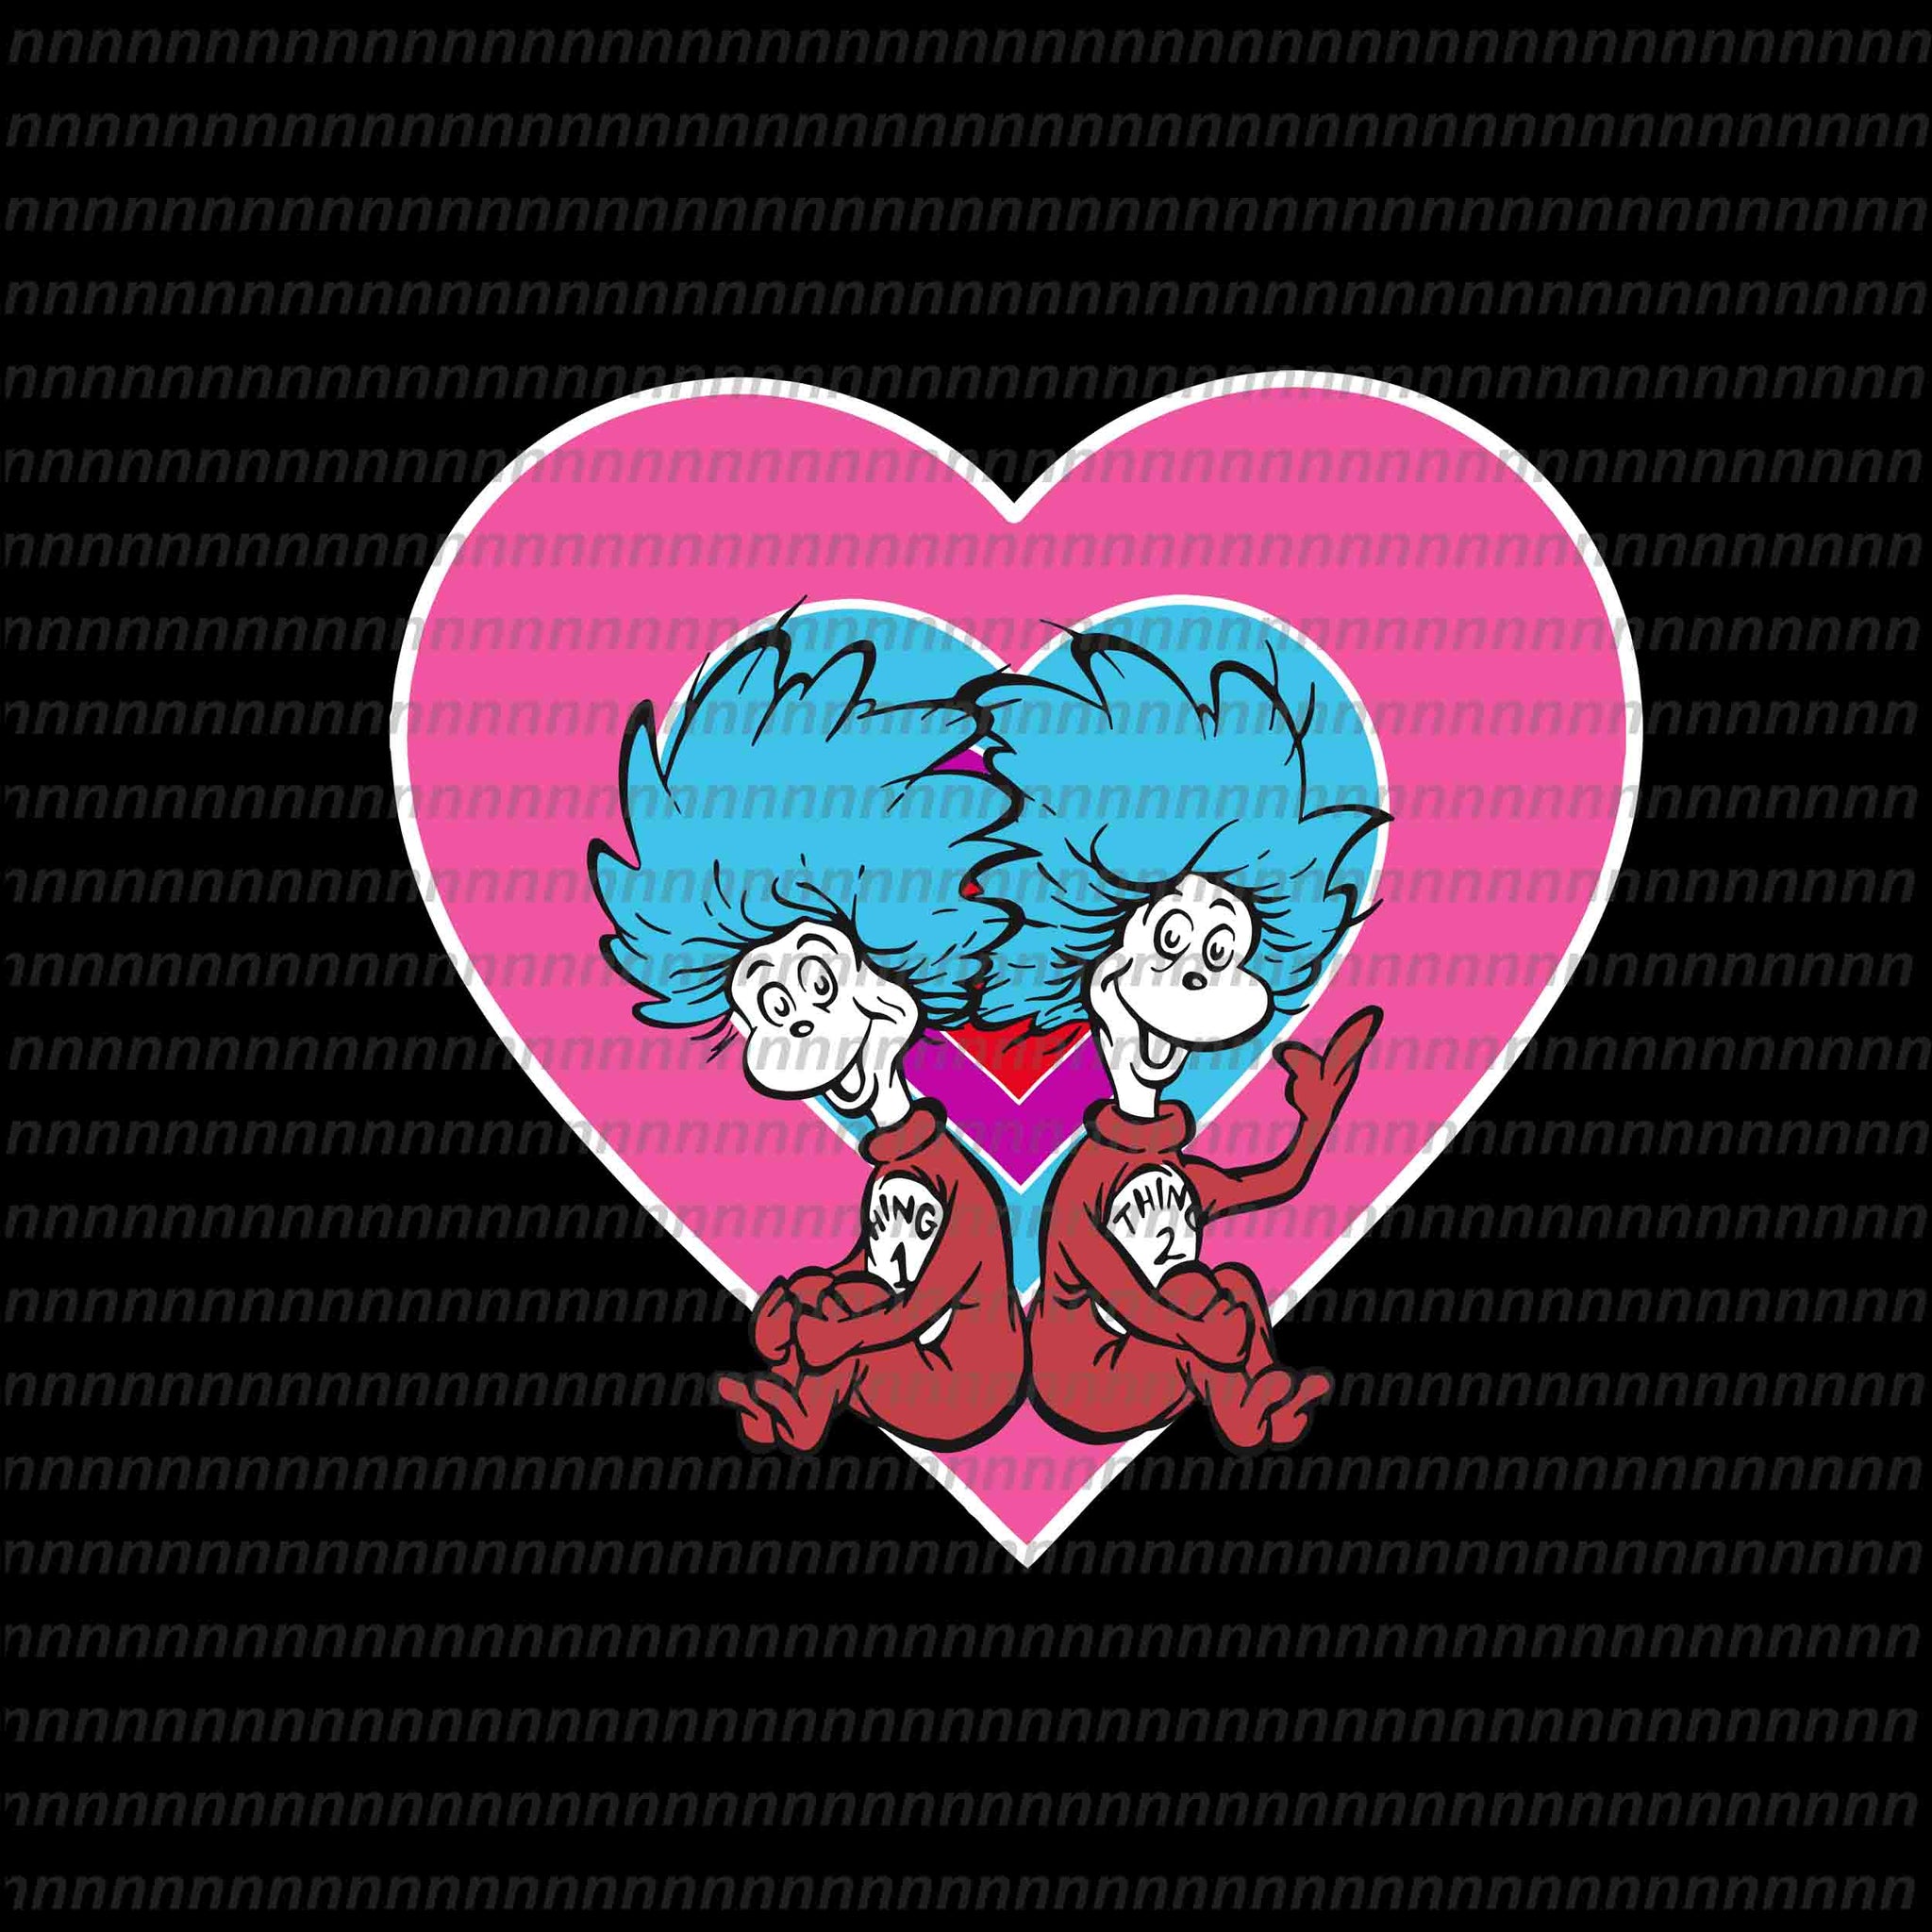 Dr seuss love, dr seus heart svg, dr seuss svg, dr seuss quote, dr seuss design, Cat in the hat svg, thing 1 thing 2 thing 3, svg, png, dxf, eps file